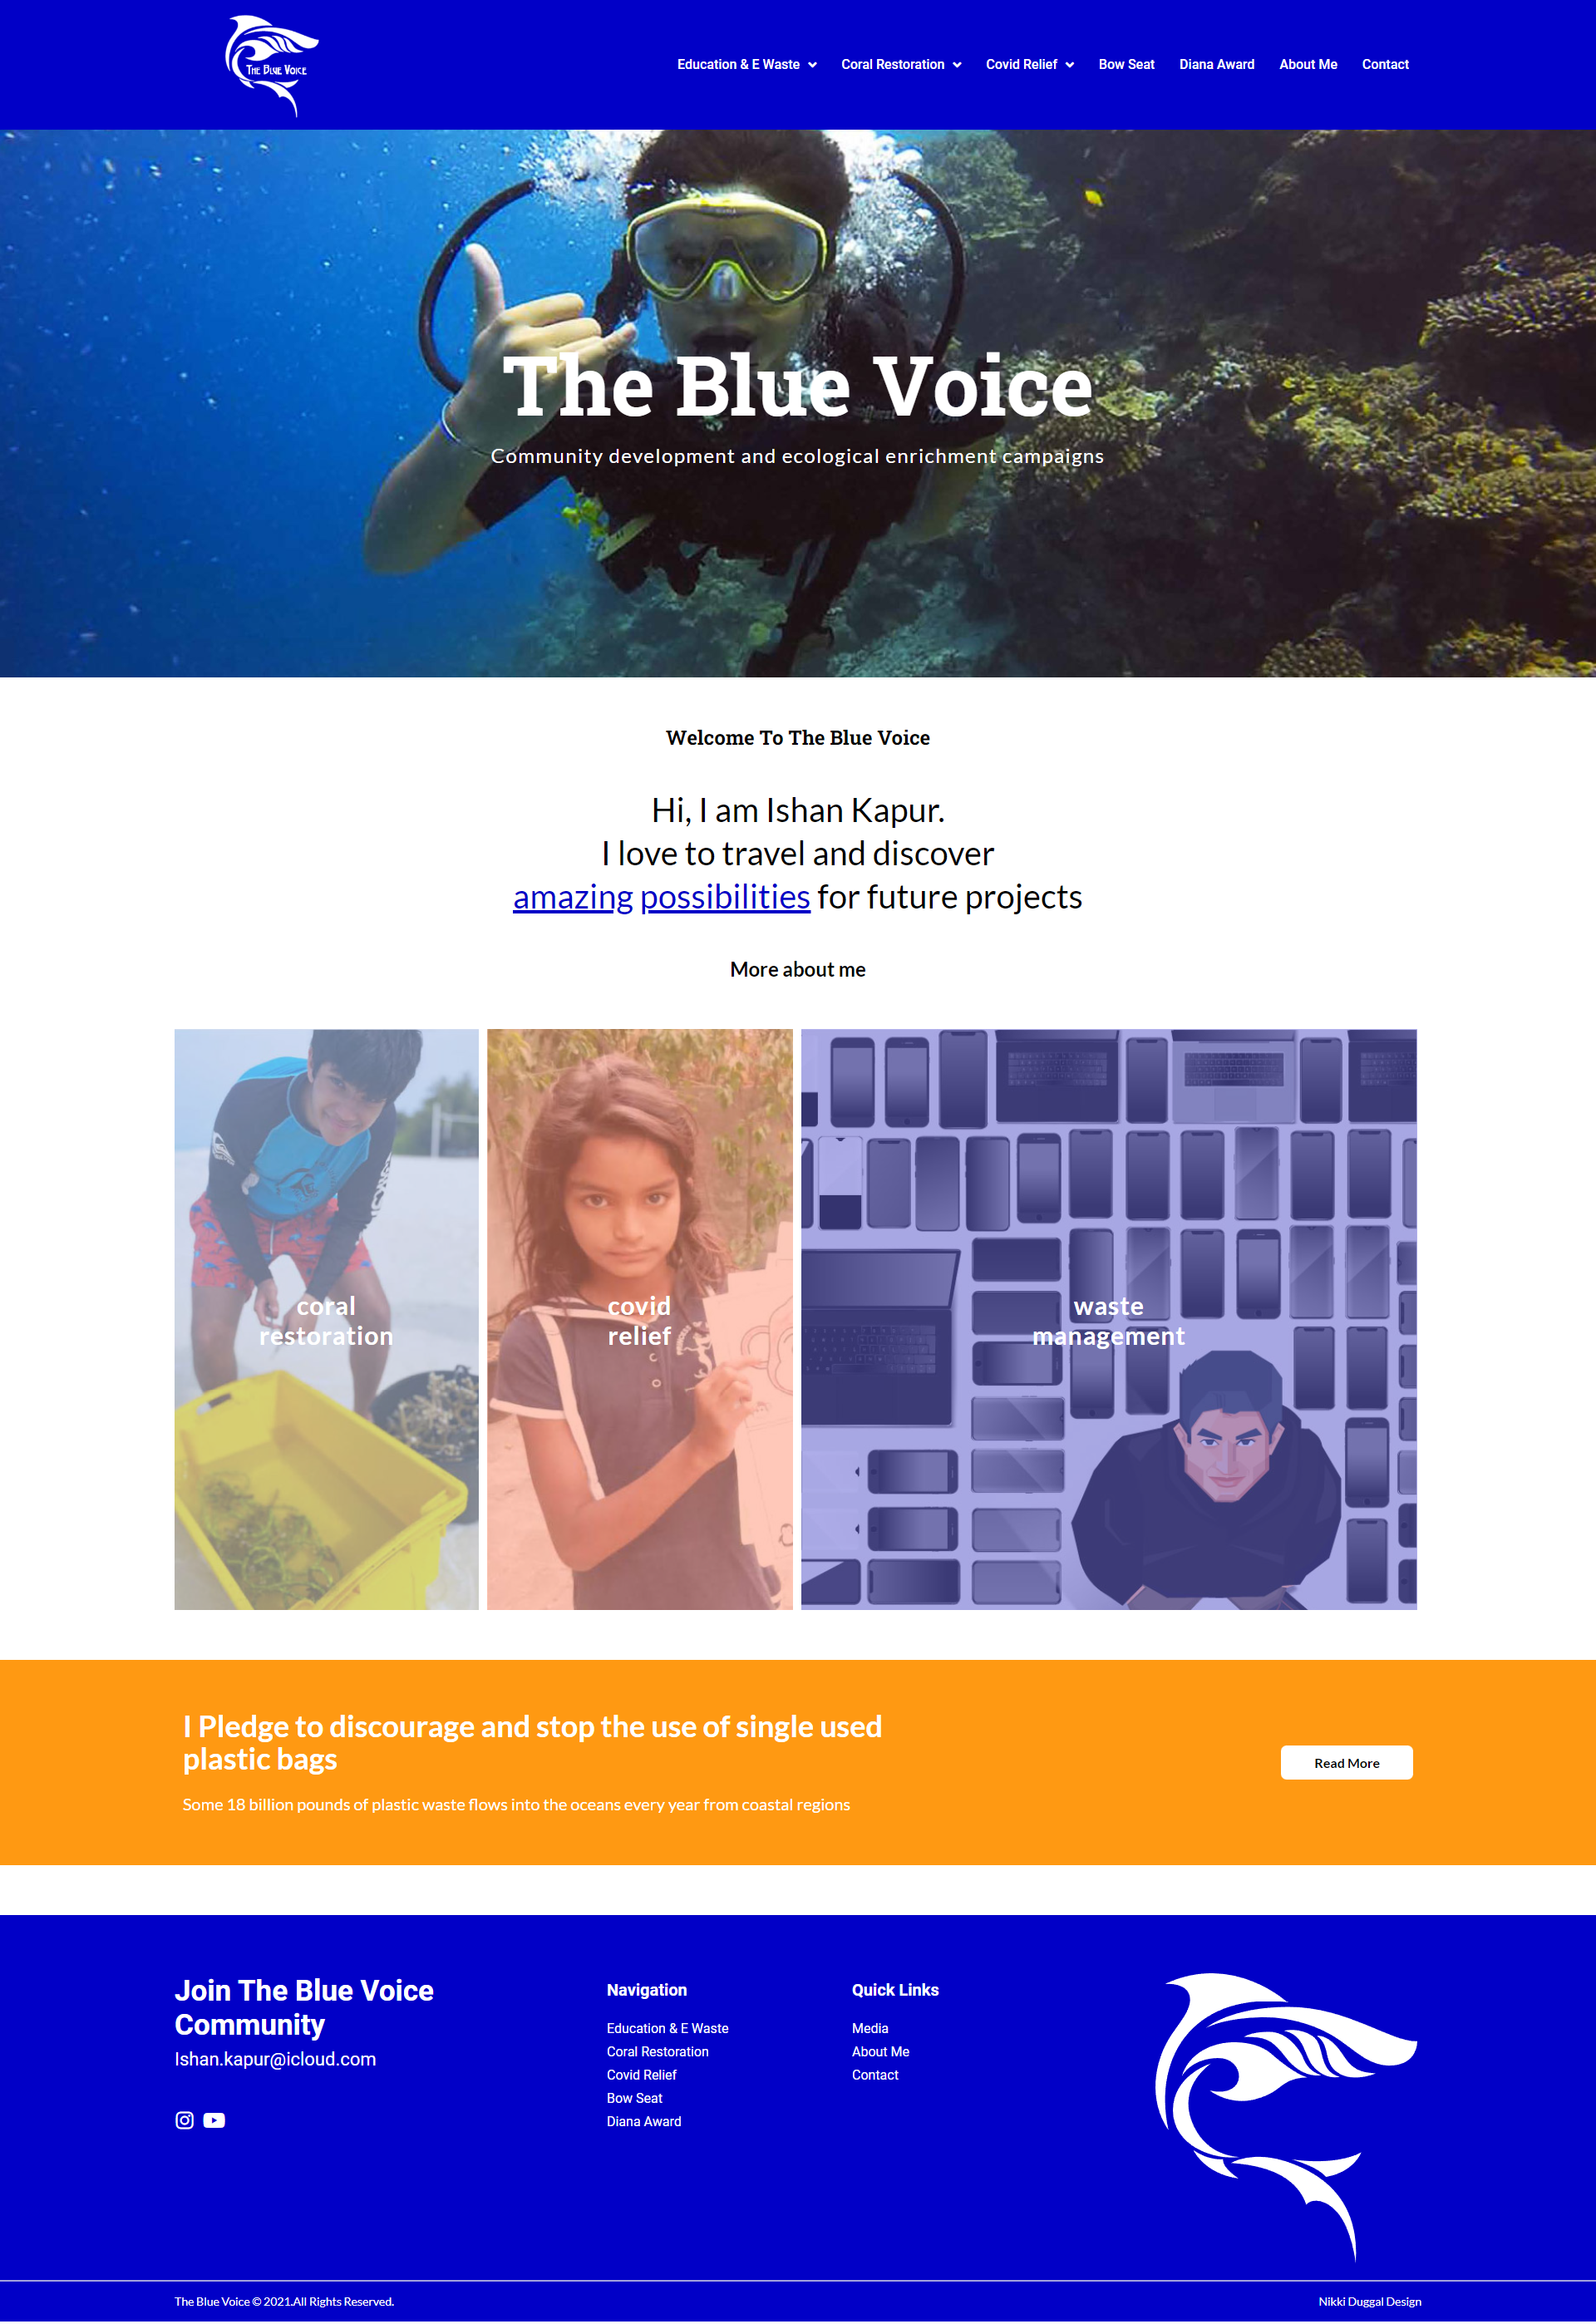 THE BLue Voice Website designed by Alfyi